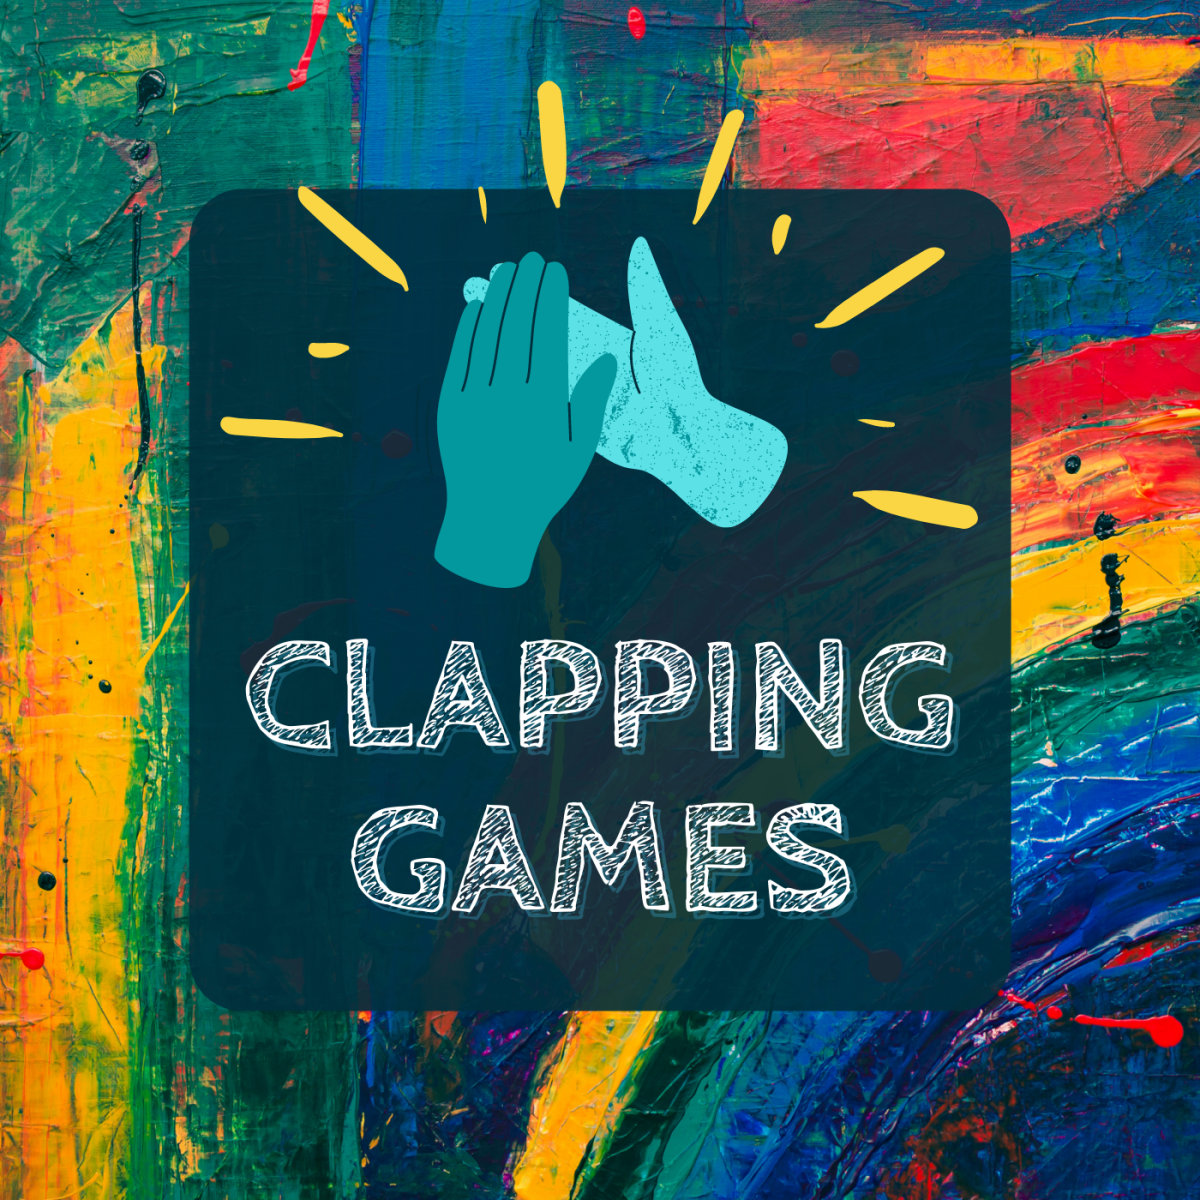 Hand Games and Clapping Games With Lyrics and Rhymes